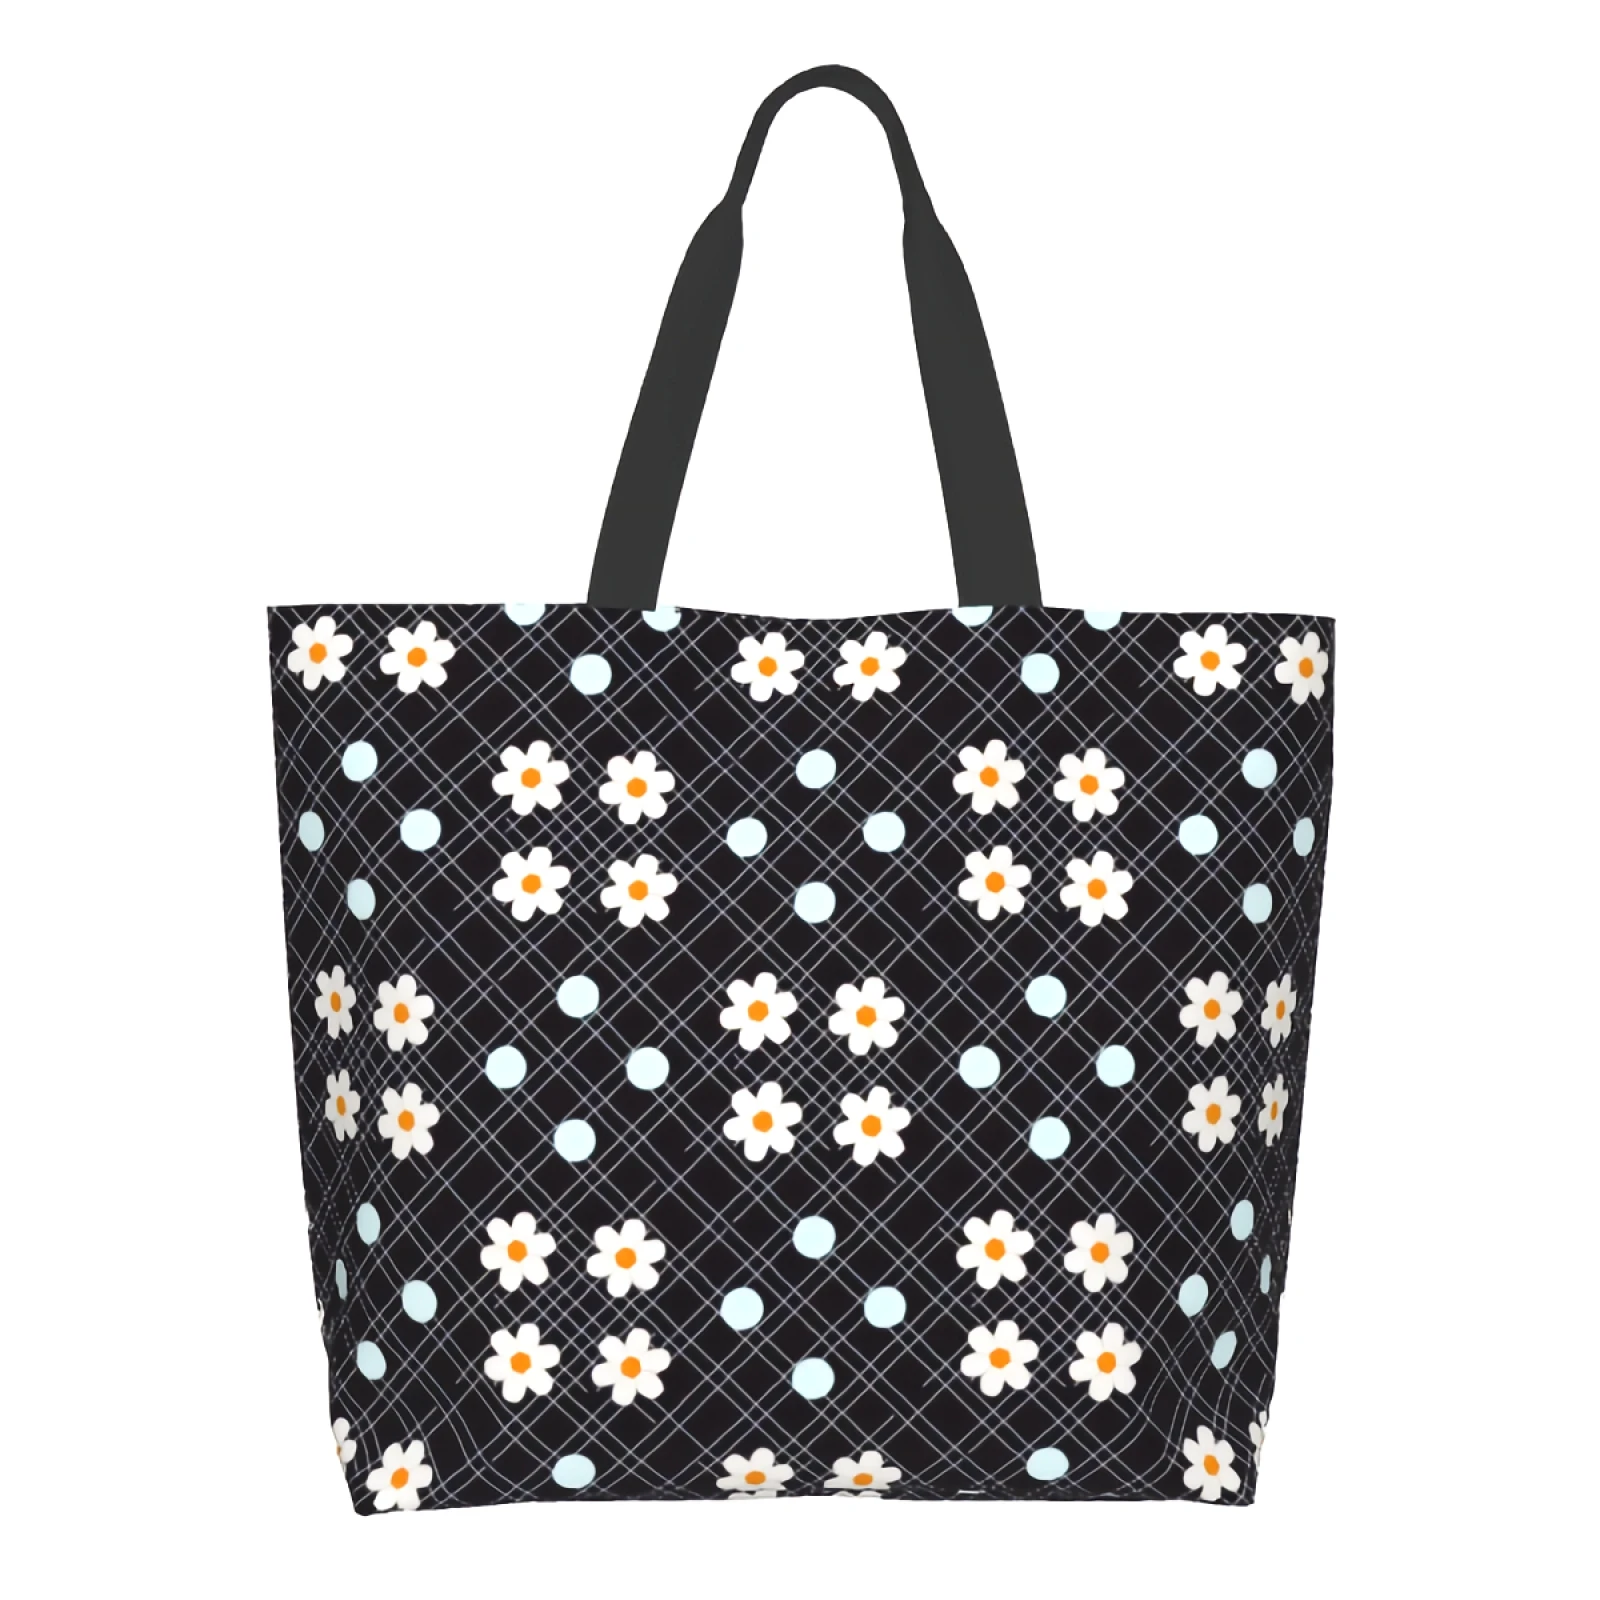 Beautiful Ditsy Floral Extra Large Grocery Bag Black And Whi